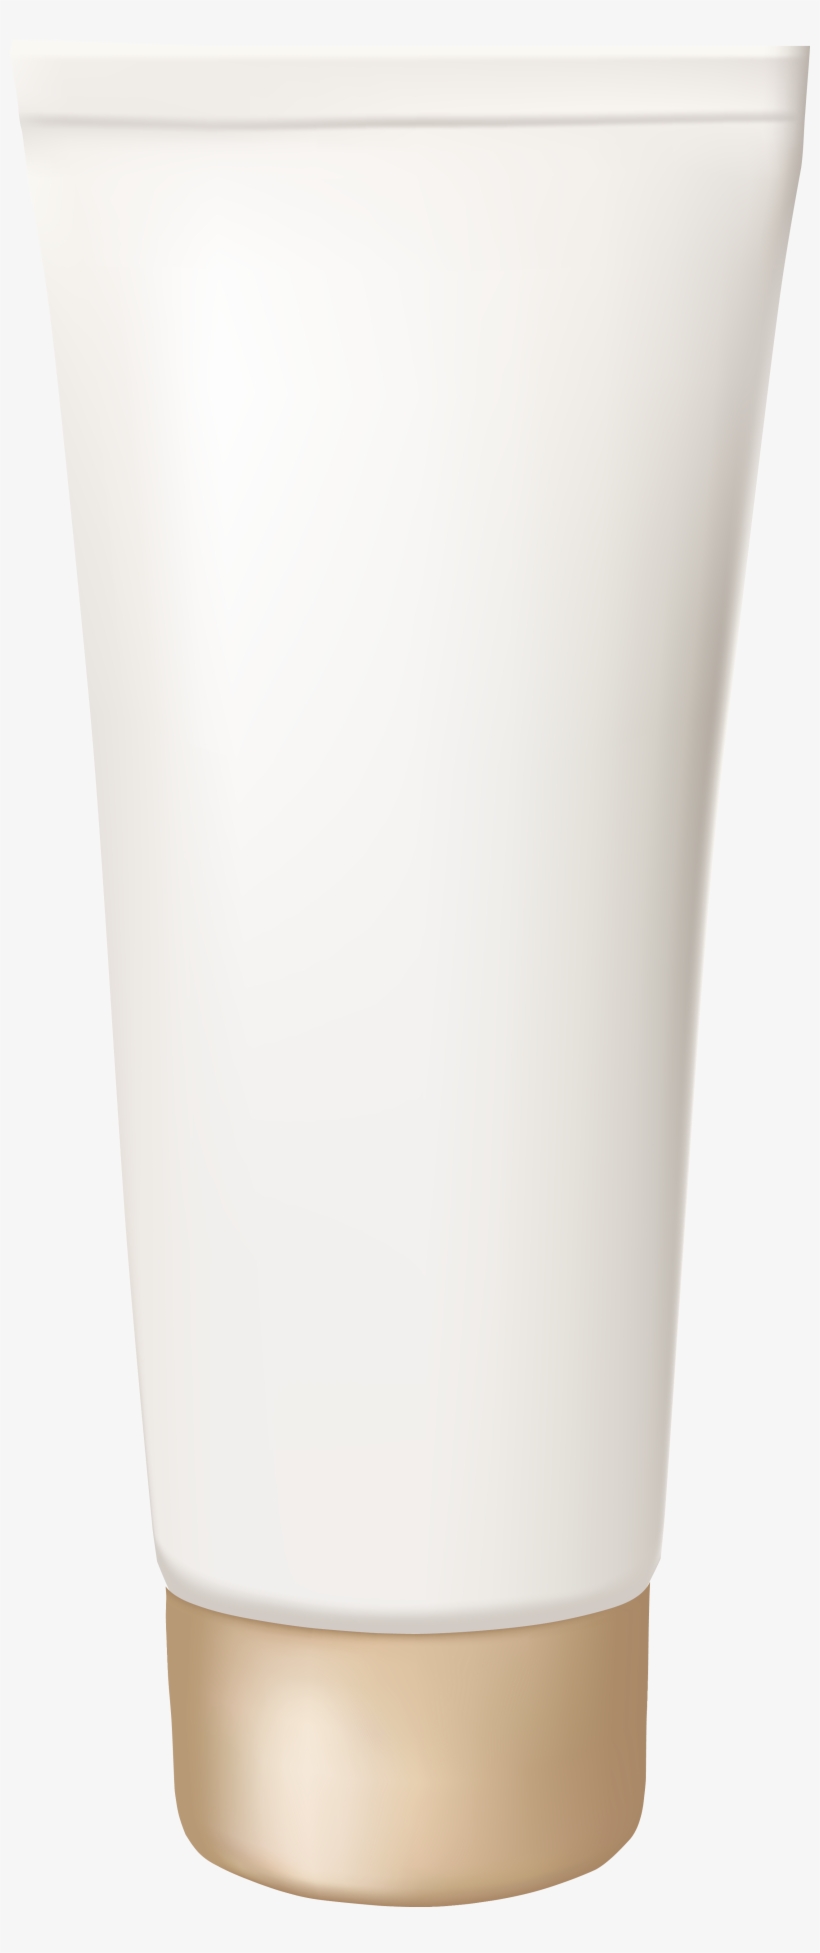 Cream Tube Png Clipart Image - Cream Tube Png, transparent png #4185693